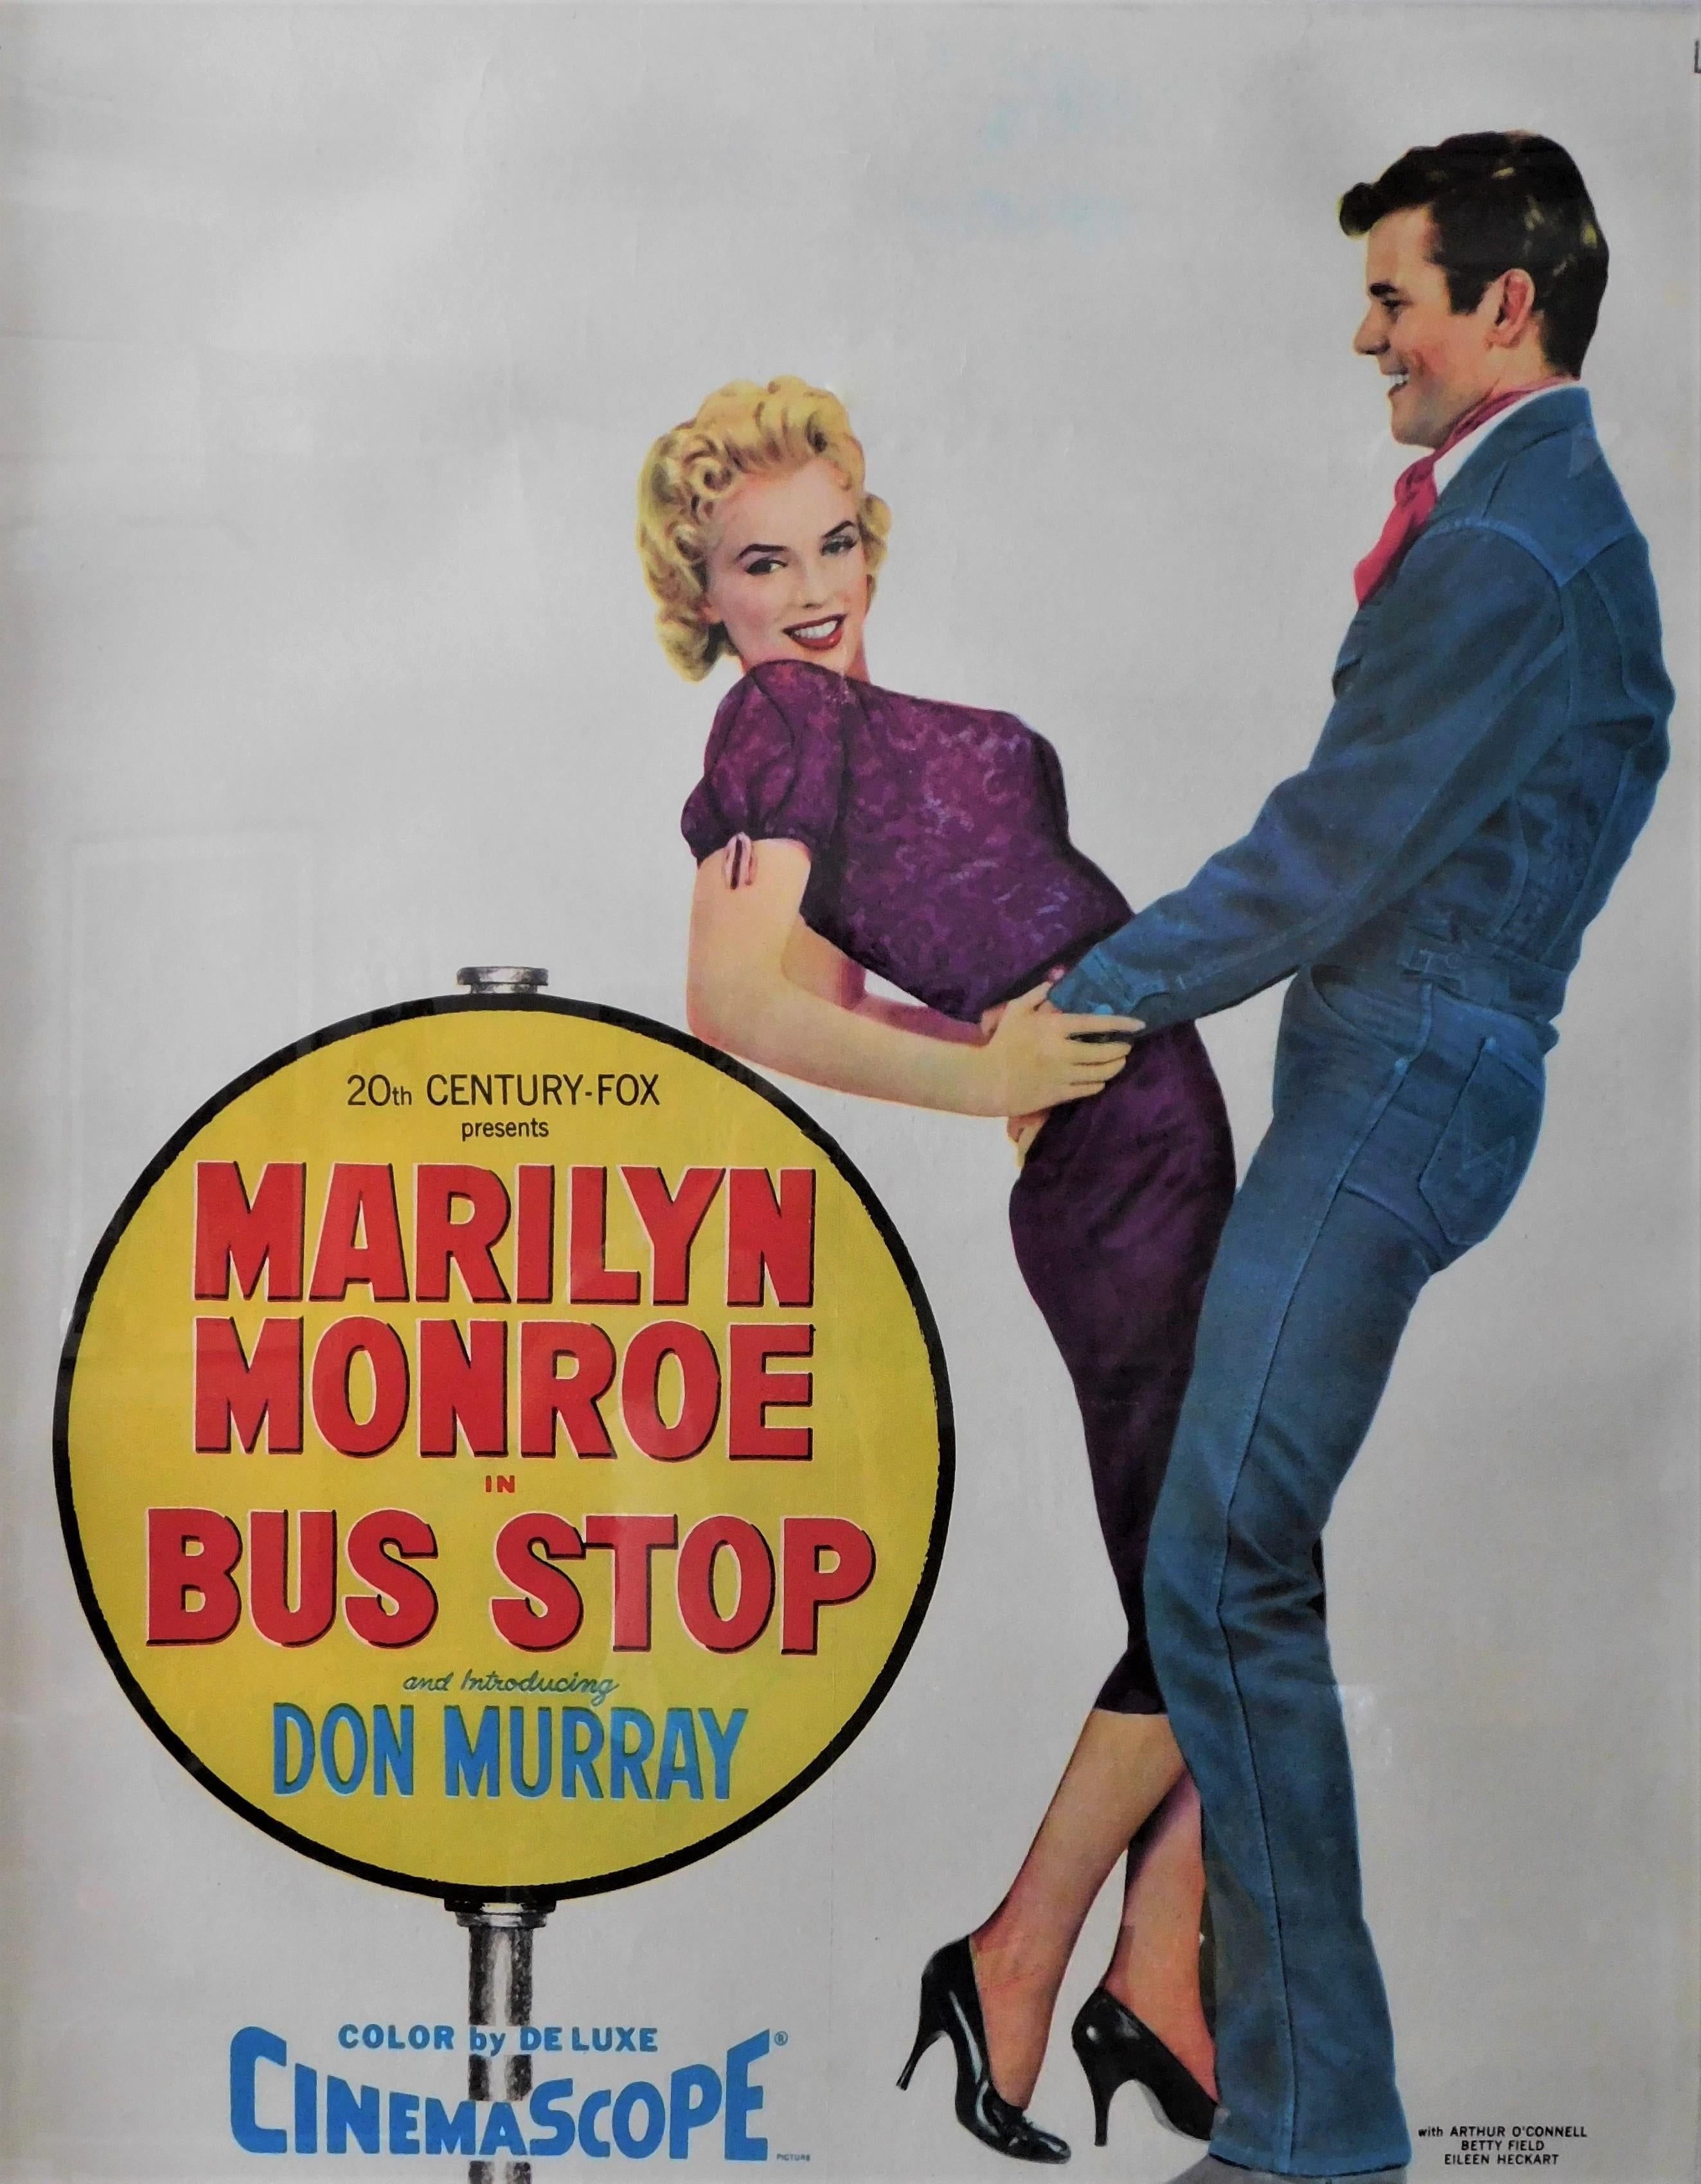 Bus Stop 1956 full-length poster of cowboy Don Murray holding a very sexy Marilyn Monroe beside a bus stop sign. An original vintage linen backed one-sheet theatrical film movie poster (1 sheet; measures 27